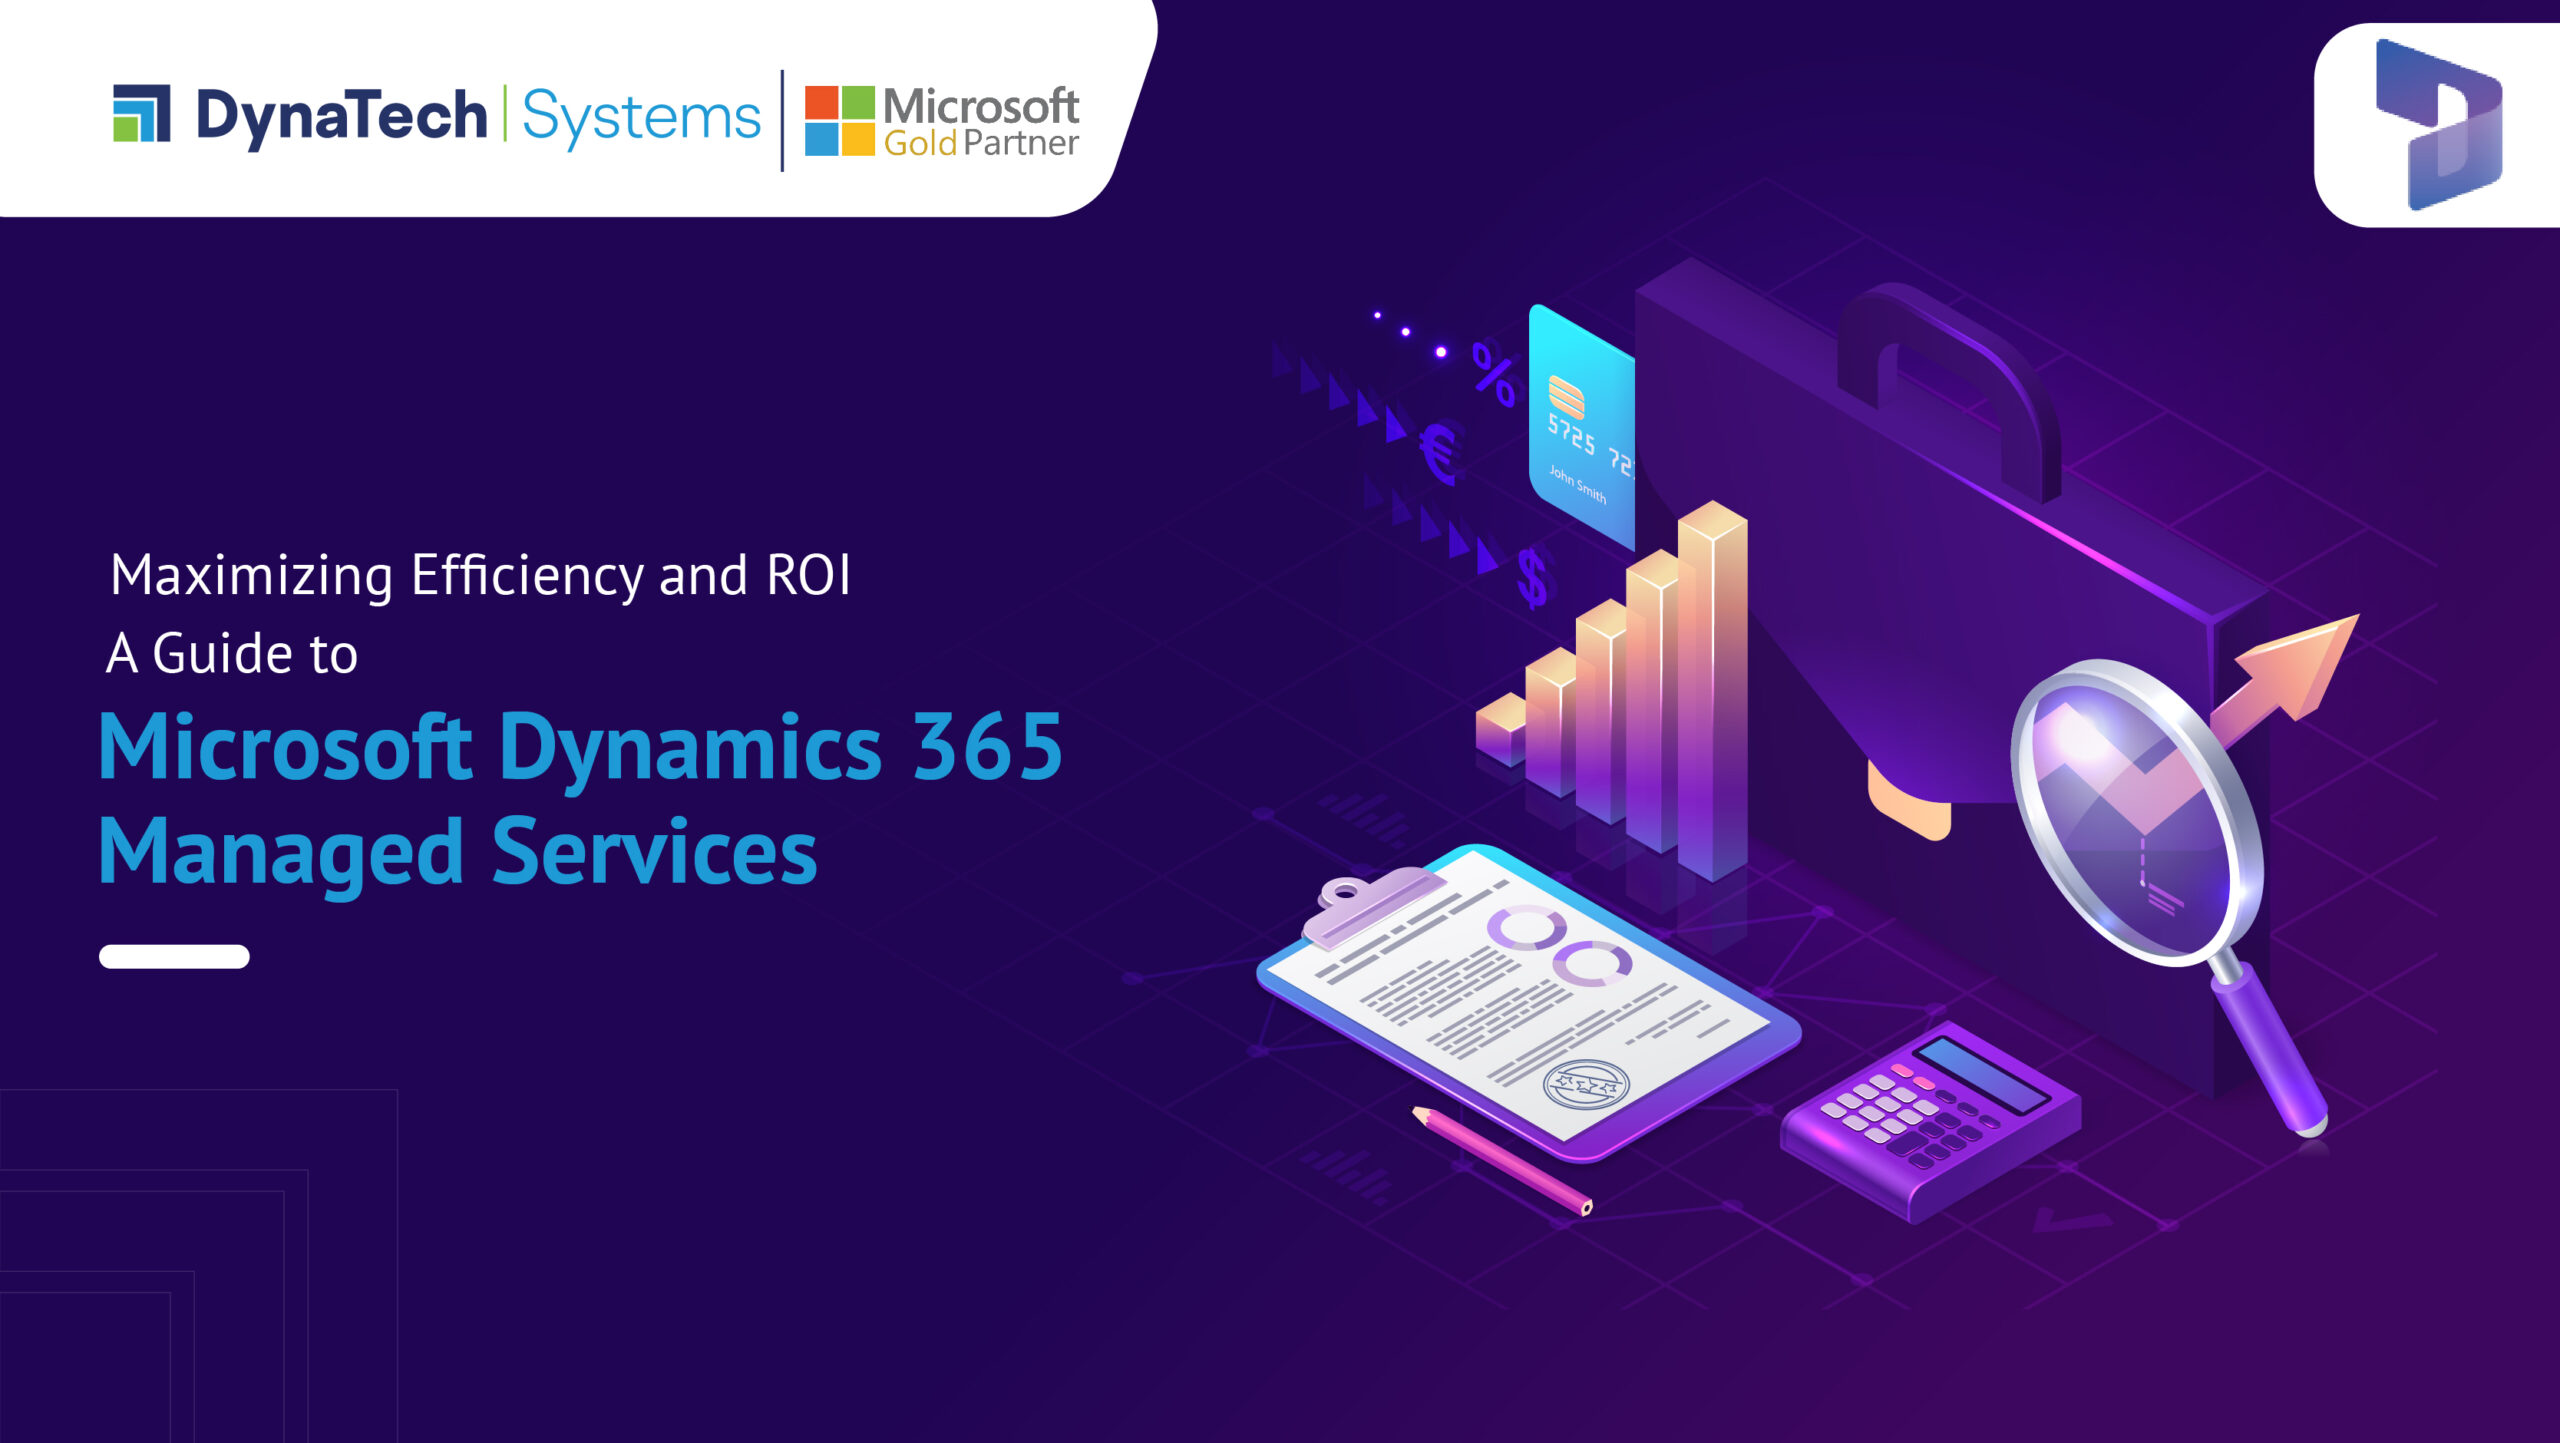 Maximizing Efficiency and ROI: A Guide to Microsoft Dynamics 365 Managed Services